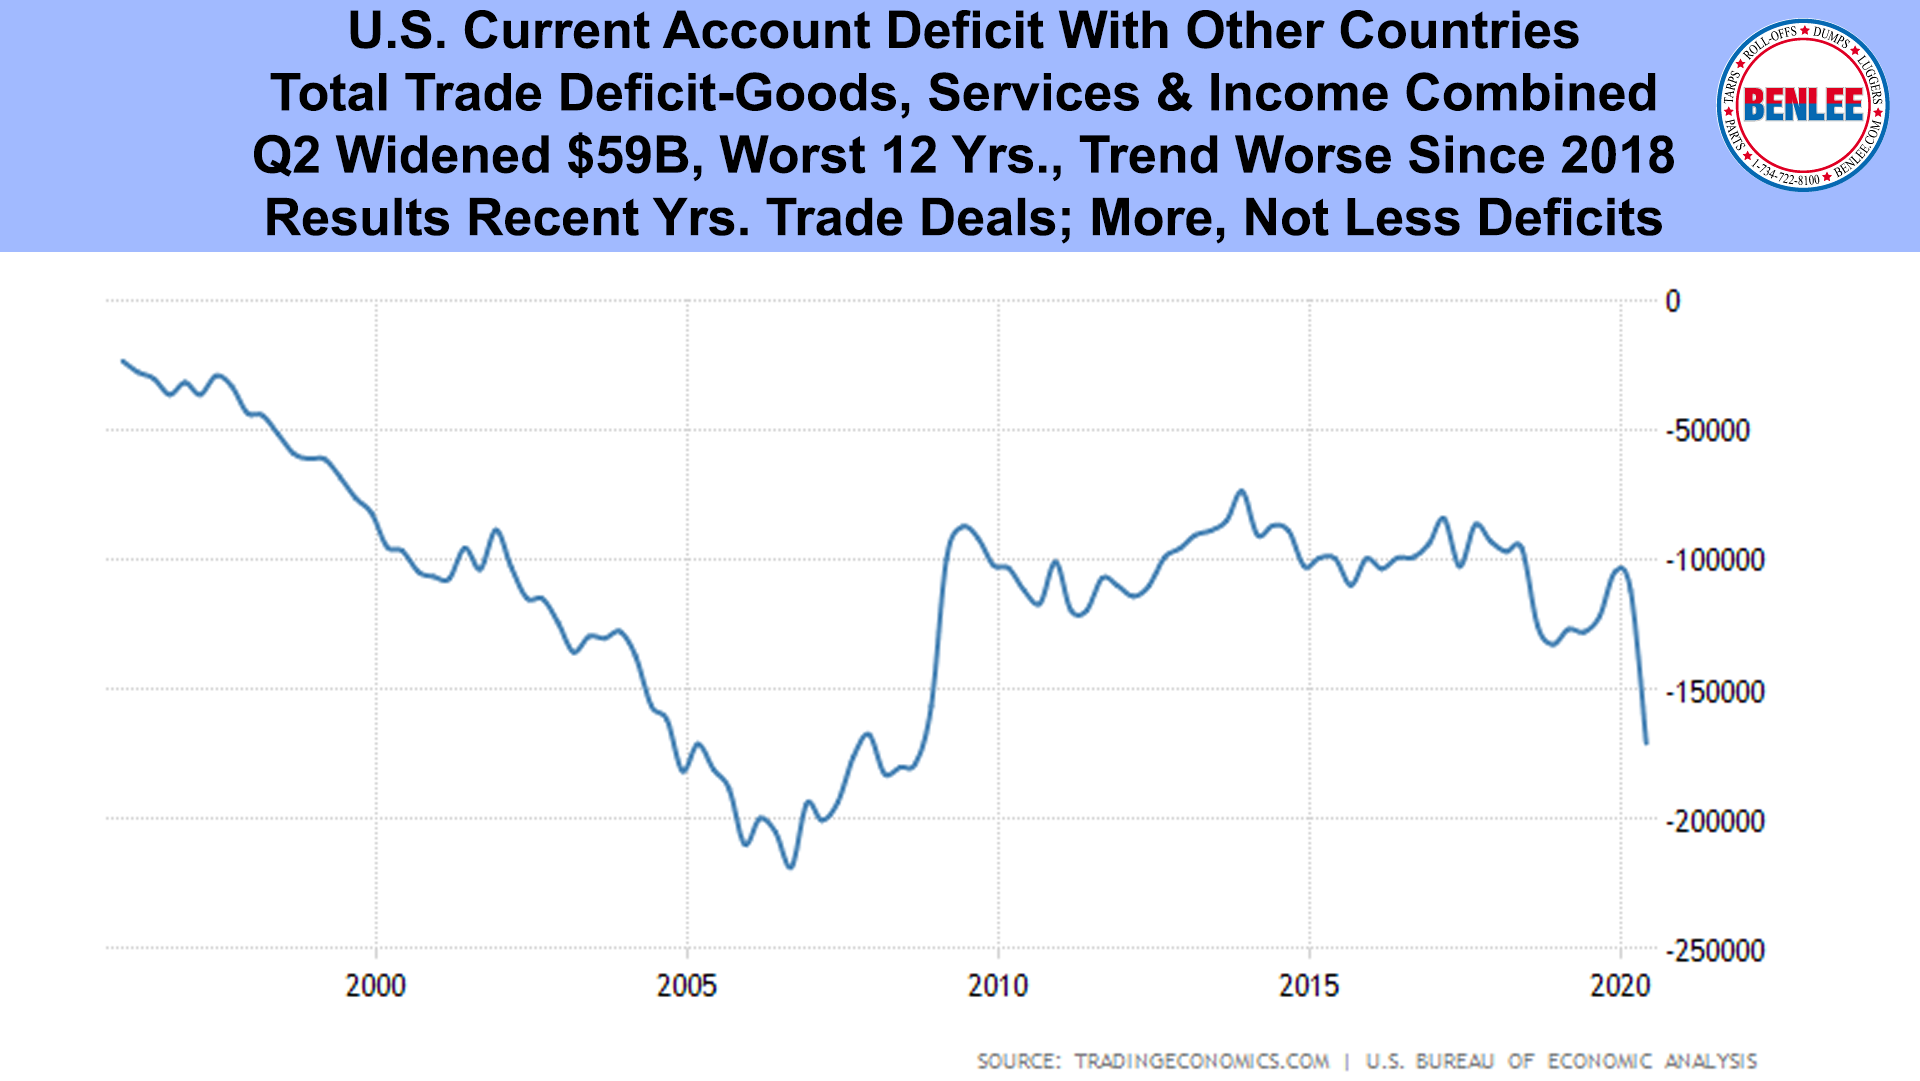 U.S. Current Account Deficit With Other Countries